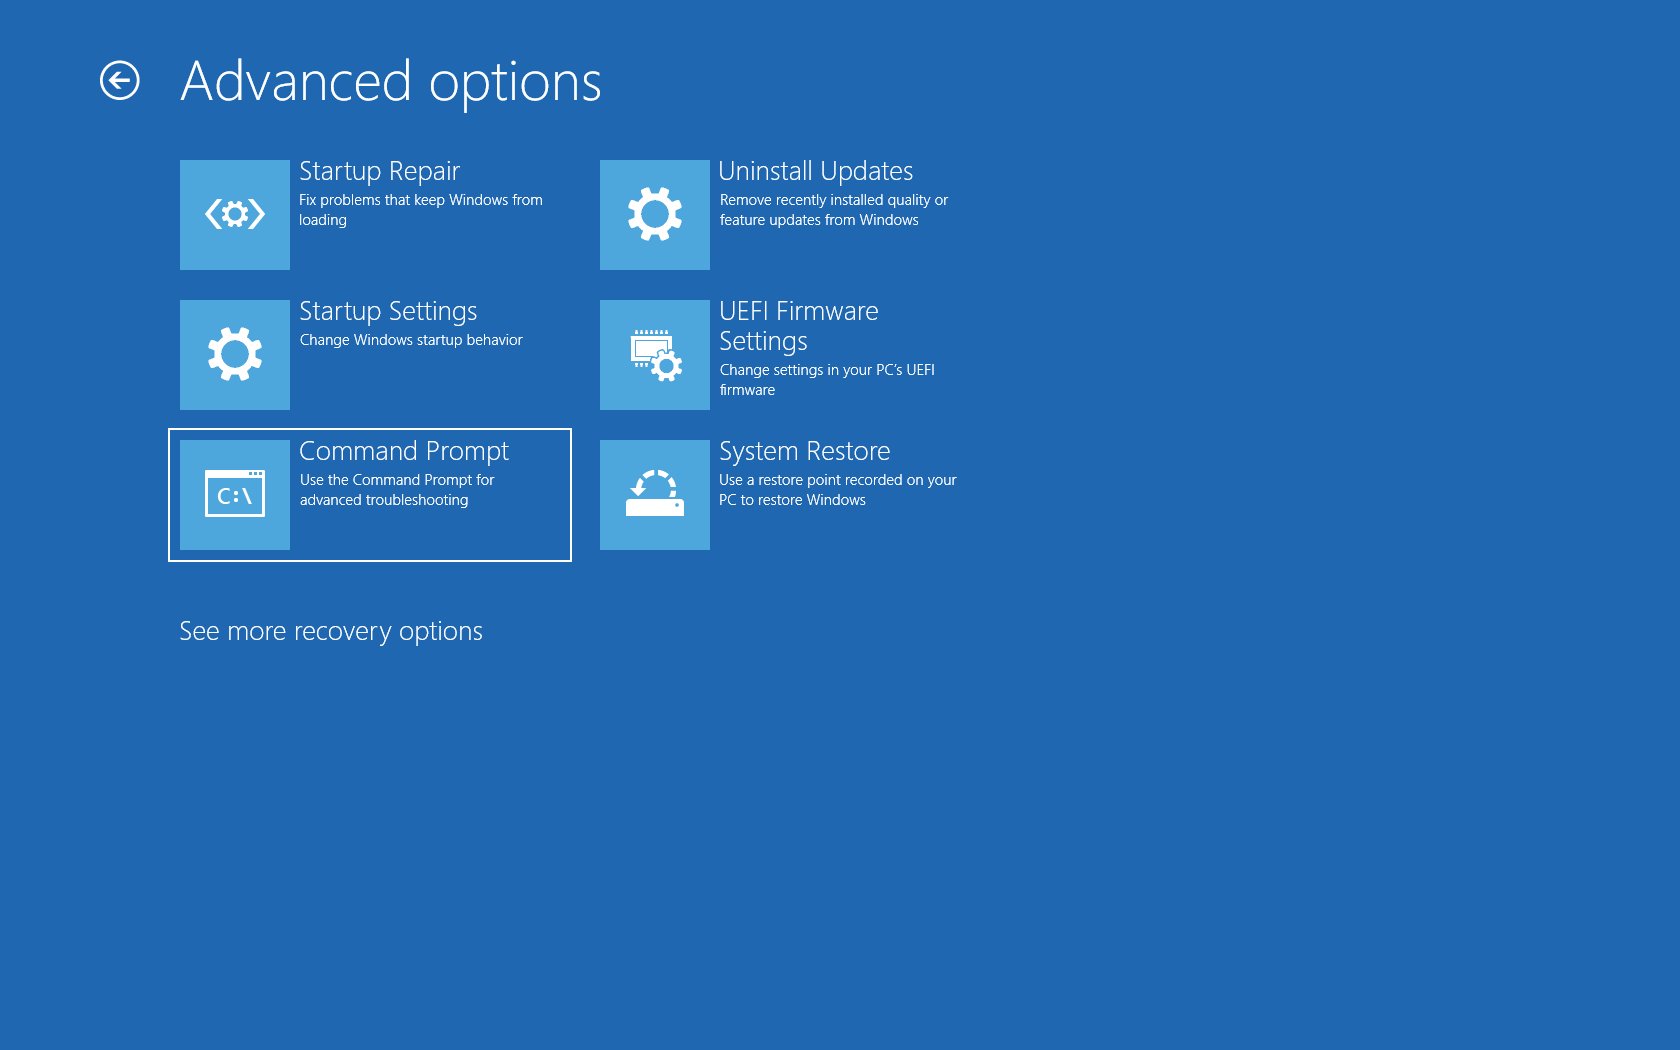 Access the advanced startup options screen
Select Troubleshoot > Advanced options > System Restore